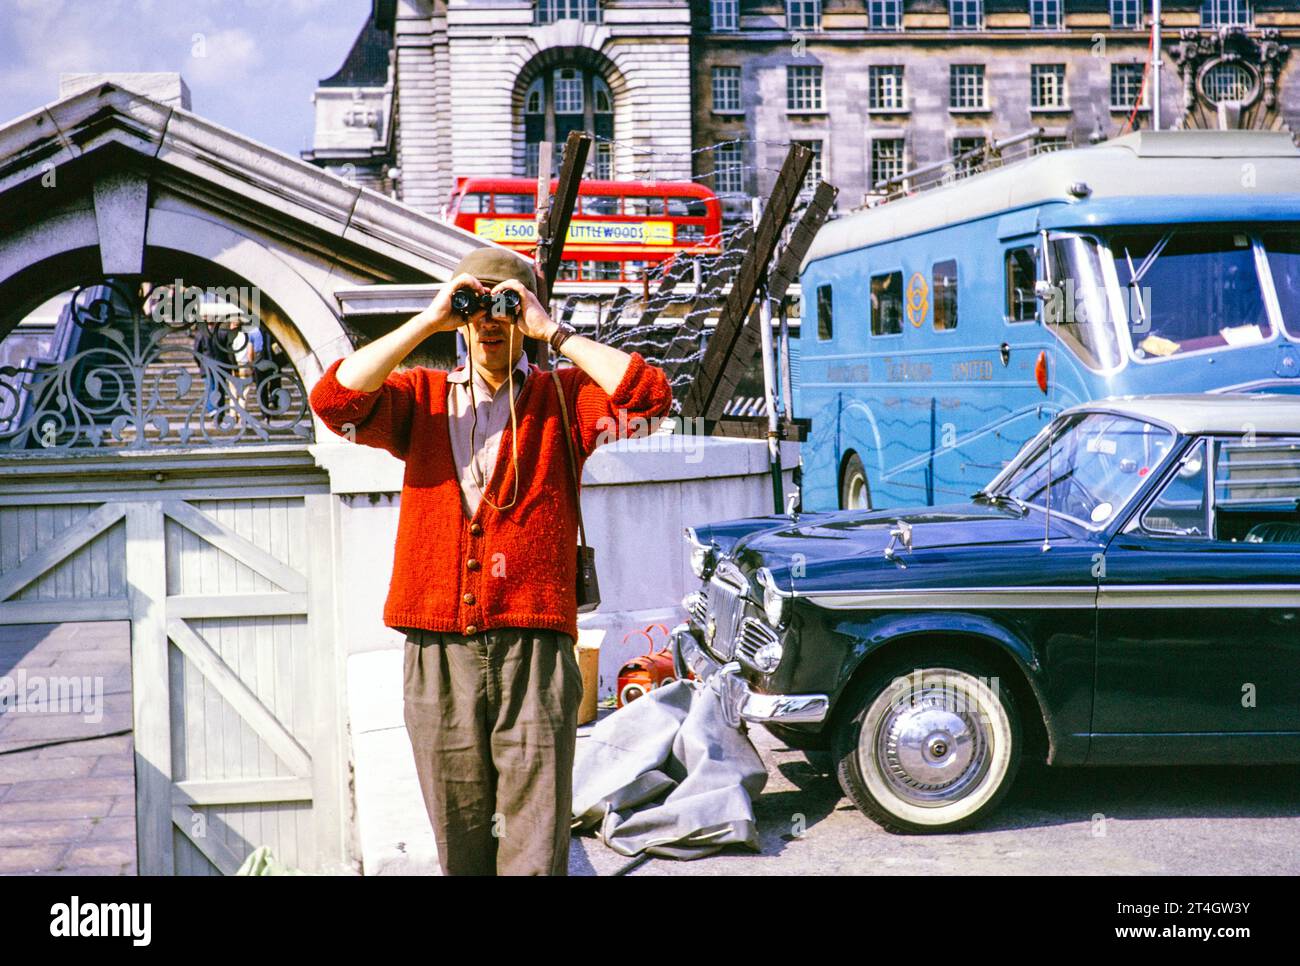 ATV outside broadcast, Telstar TV satellite launch, Westminster Bridge, London, England, UK, July 1962 - rigger Phil Comber with binoculars. Photograph by Alan 'Taffy' Harries Stock Photo